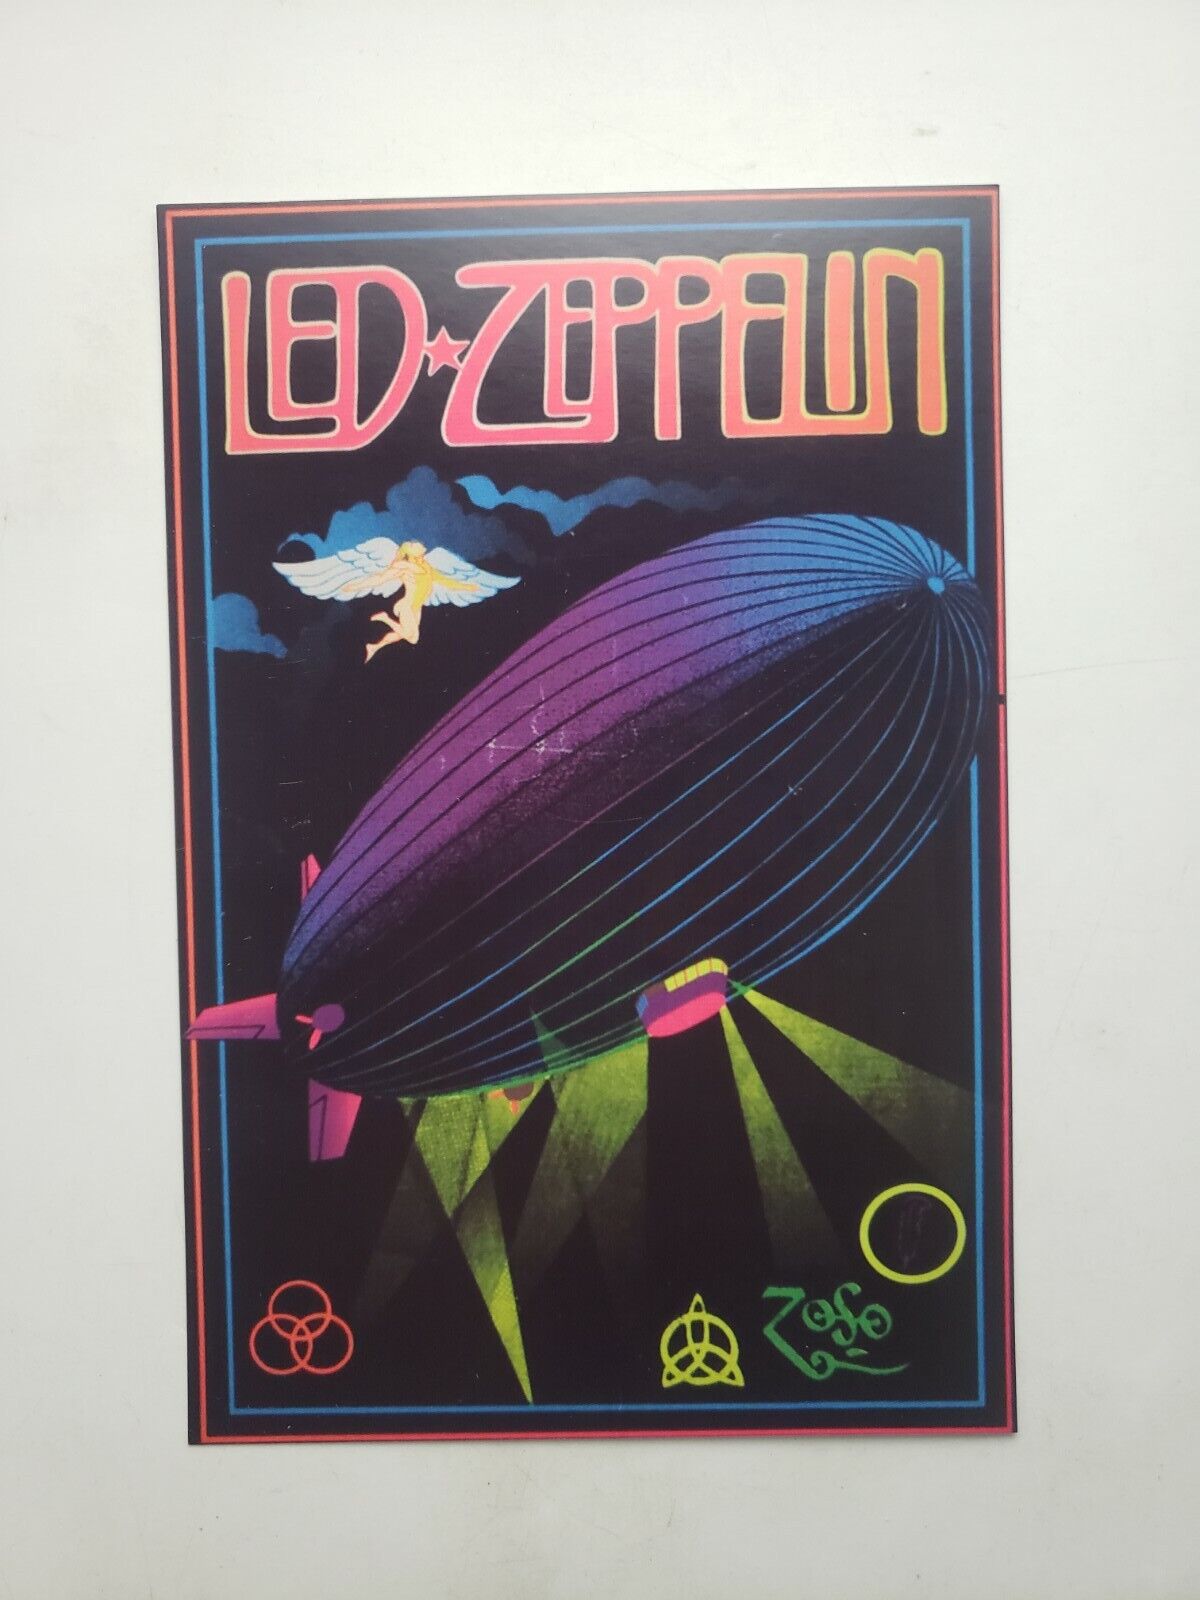 Led Zeppelin Postcard Collectible 4 x 6